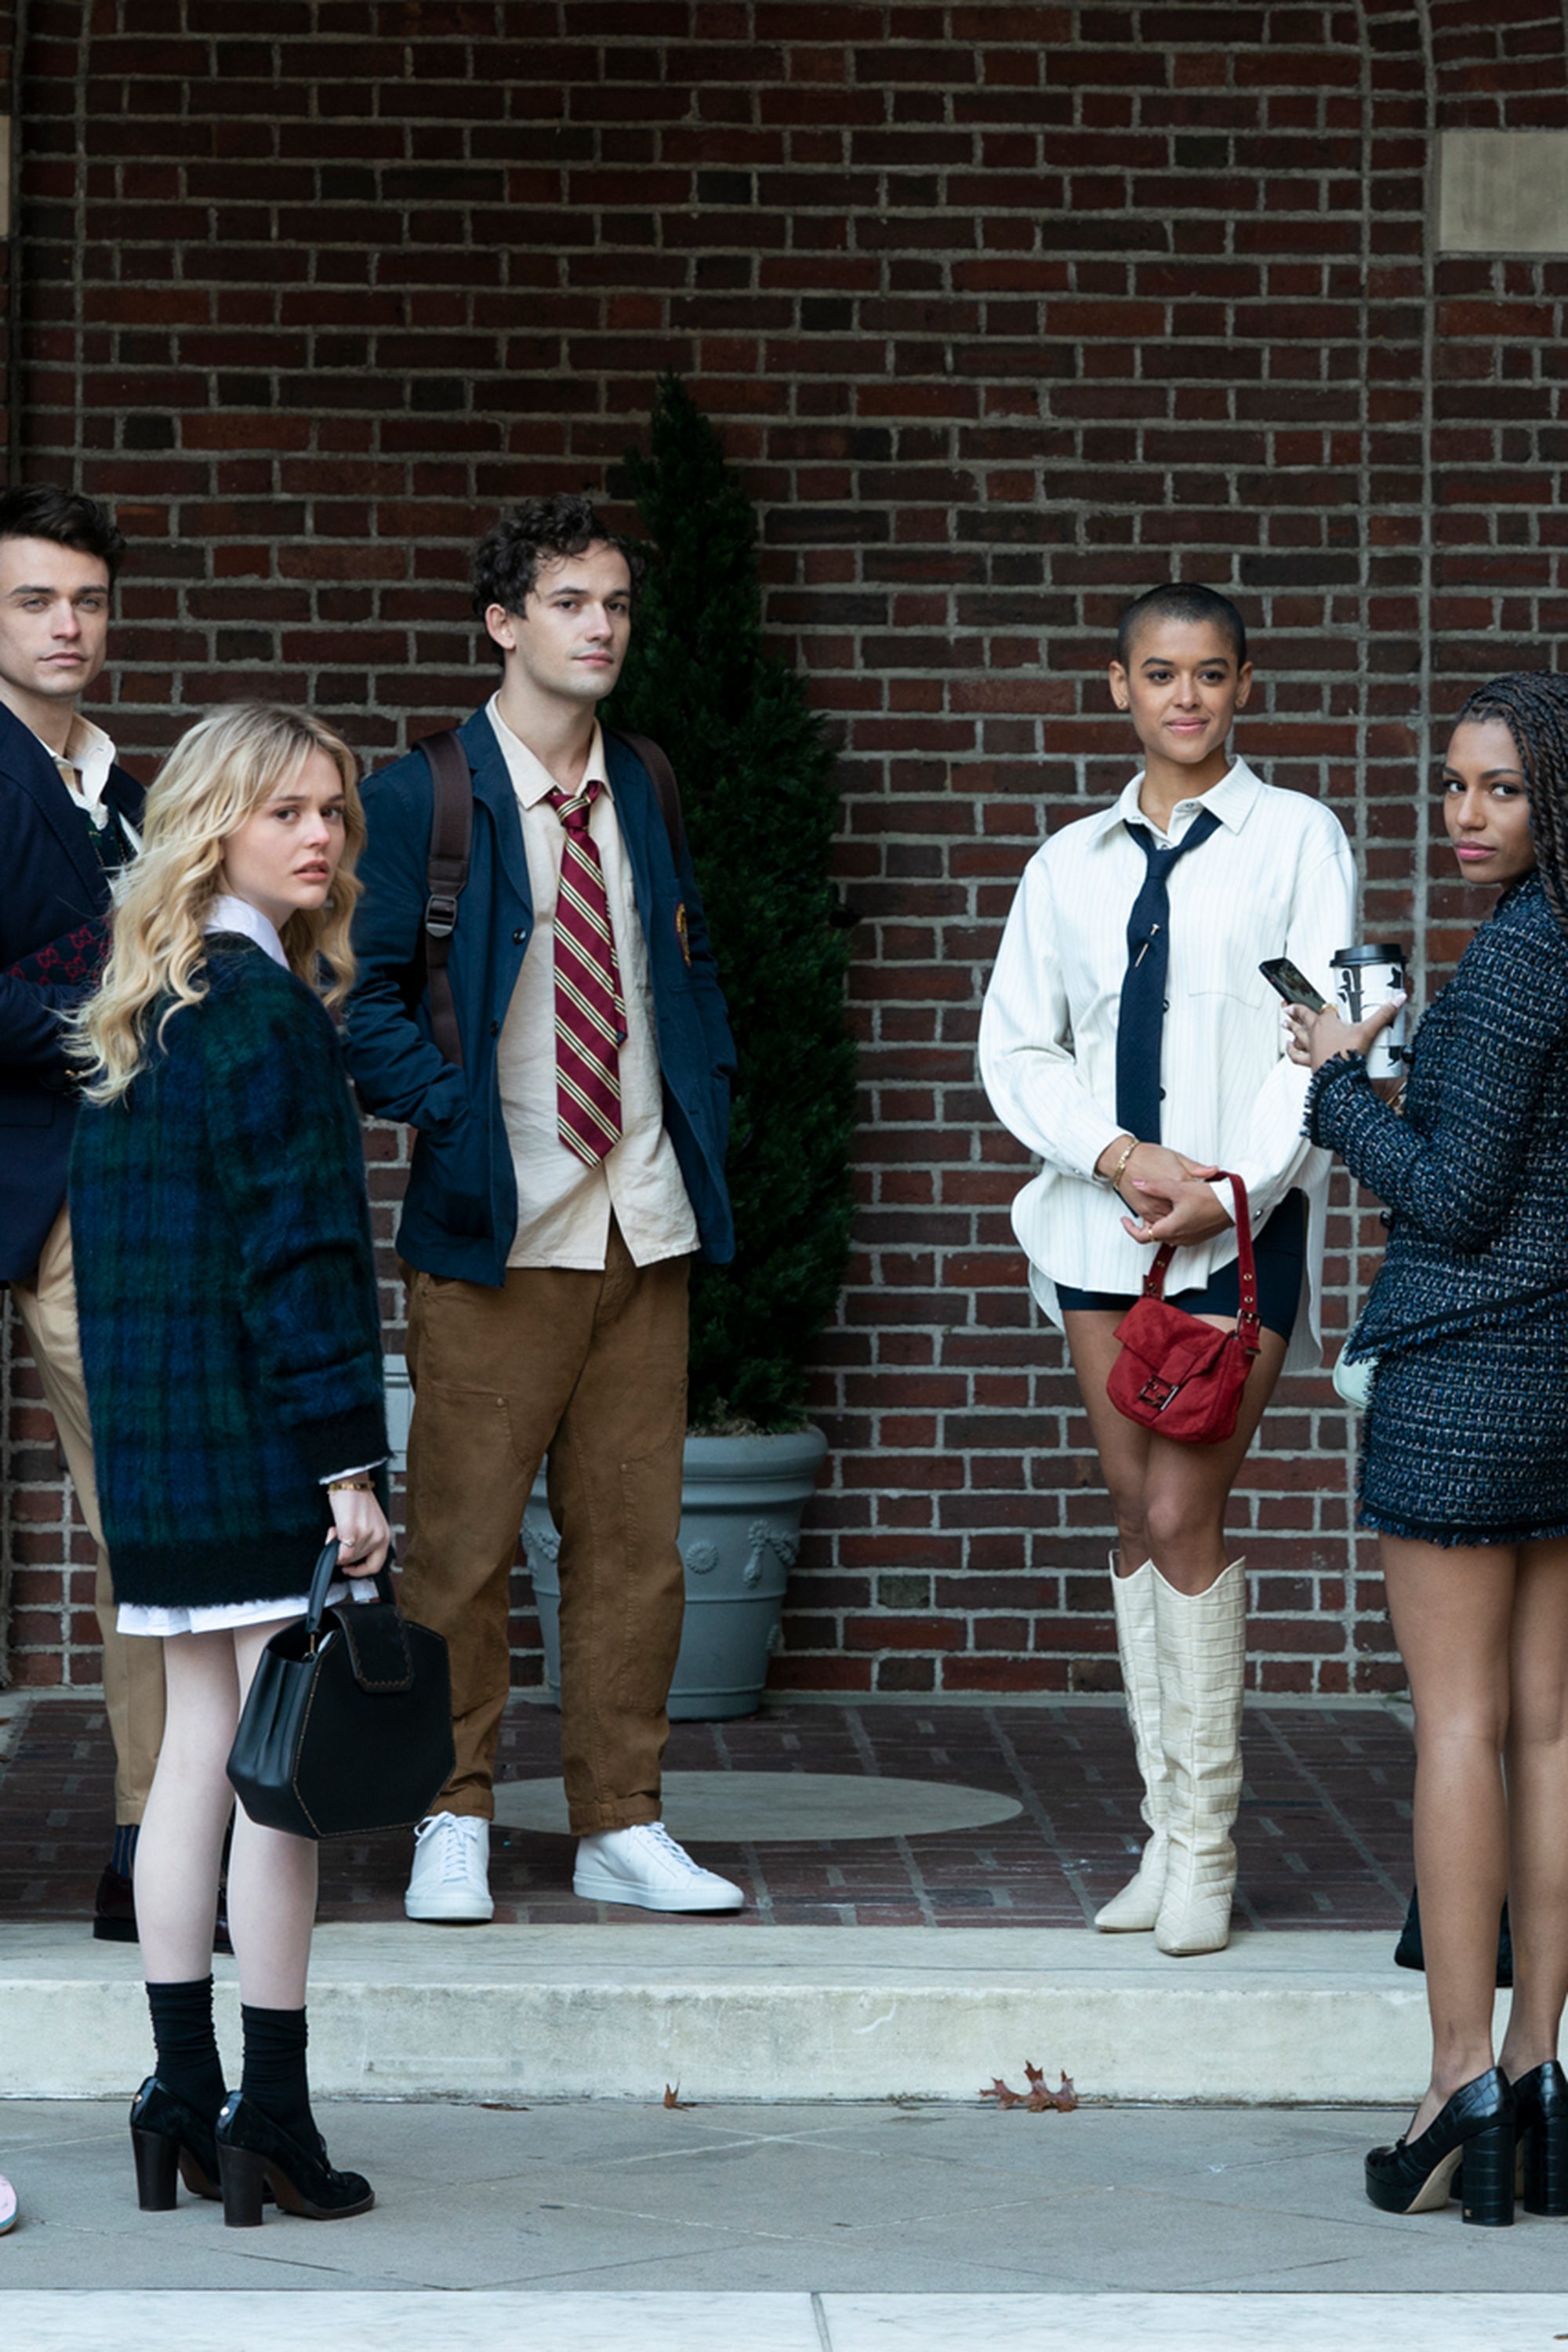 A First Look at the Outfits in HBO Max's Gossip Girl Reboot